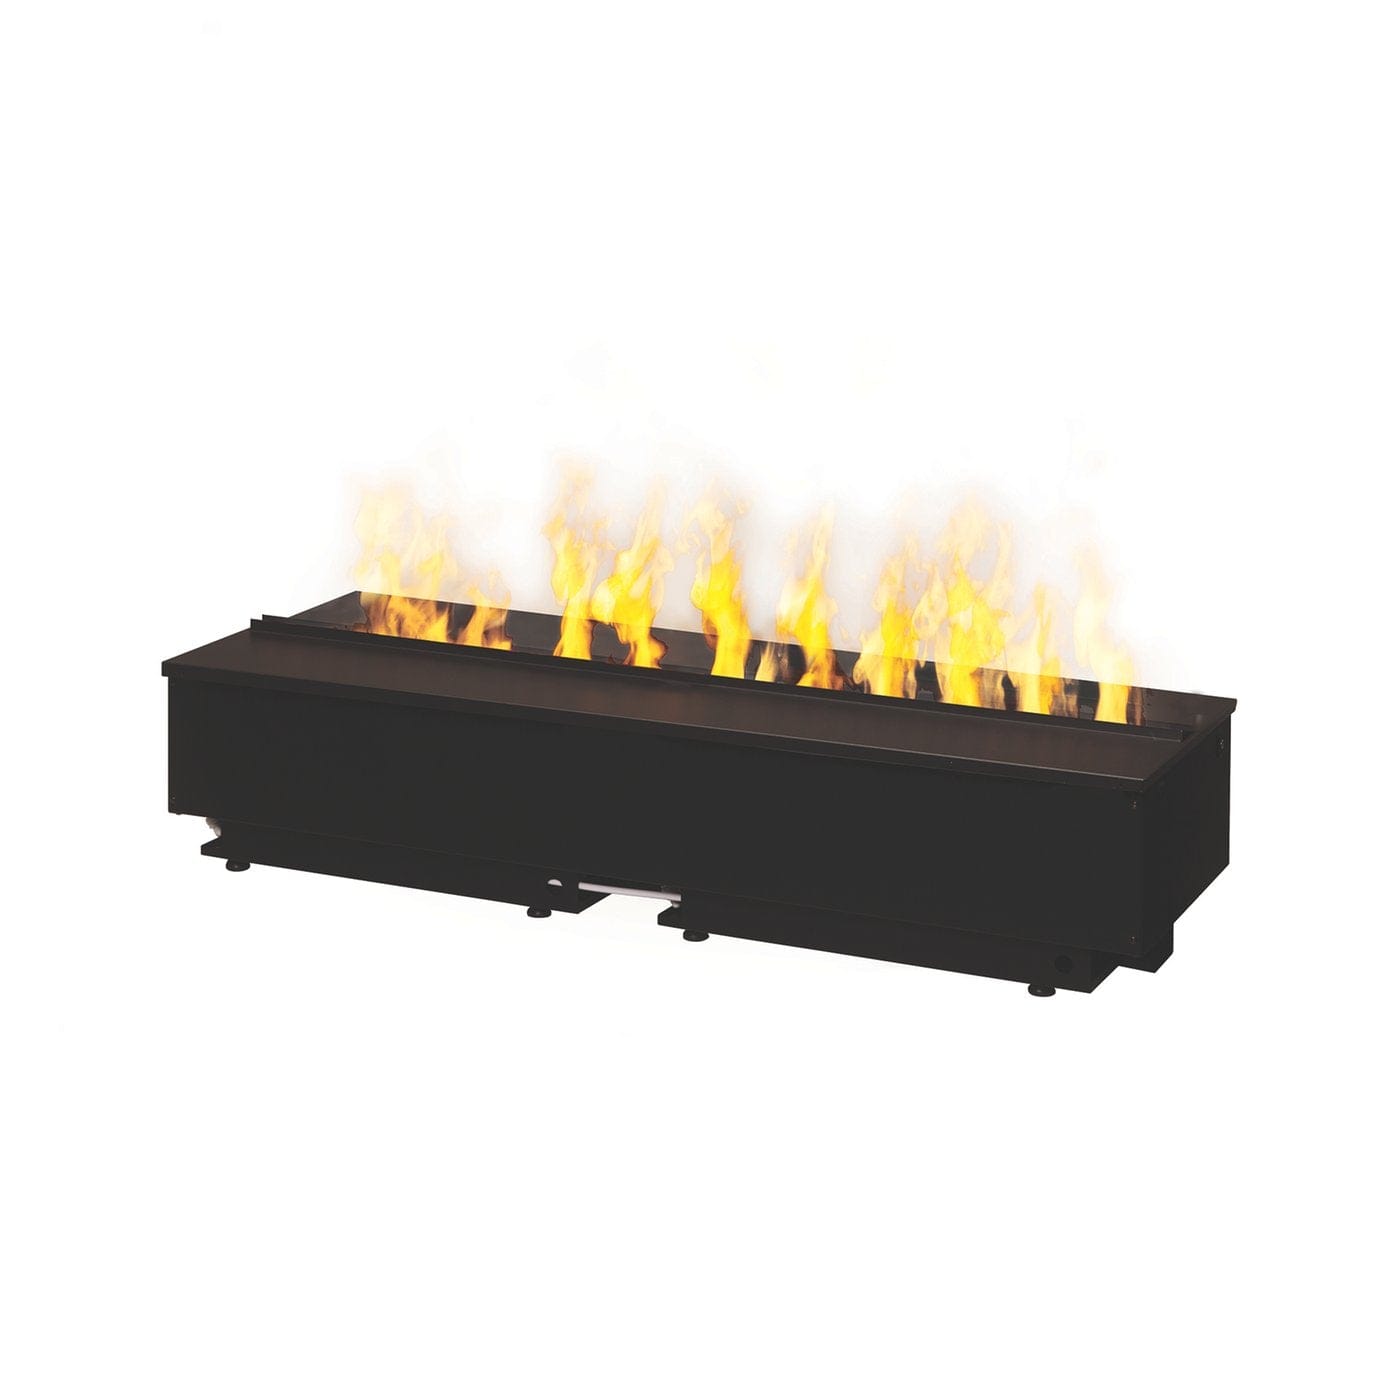 StarWood Fireplaces - Dimplex Opti-Myst Pro 1000 Built-In Electric Cassette -